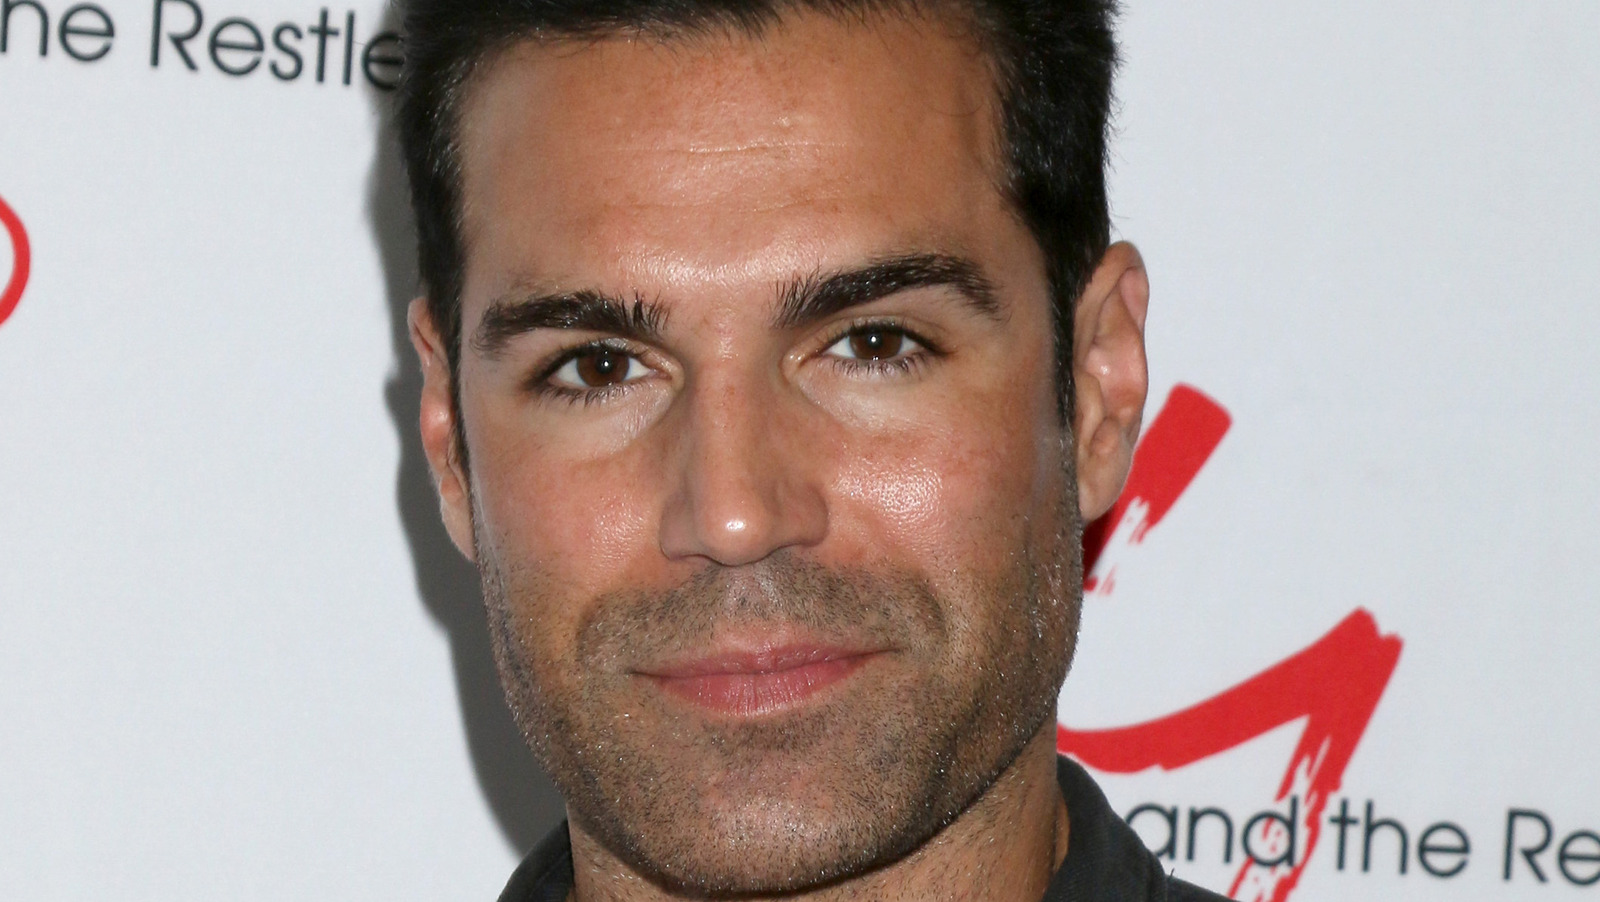 Who is jordi vilasuso married to